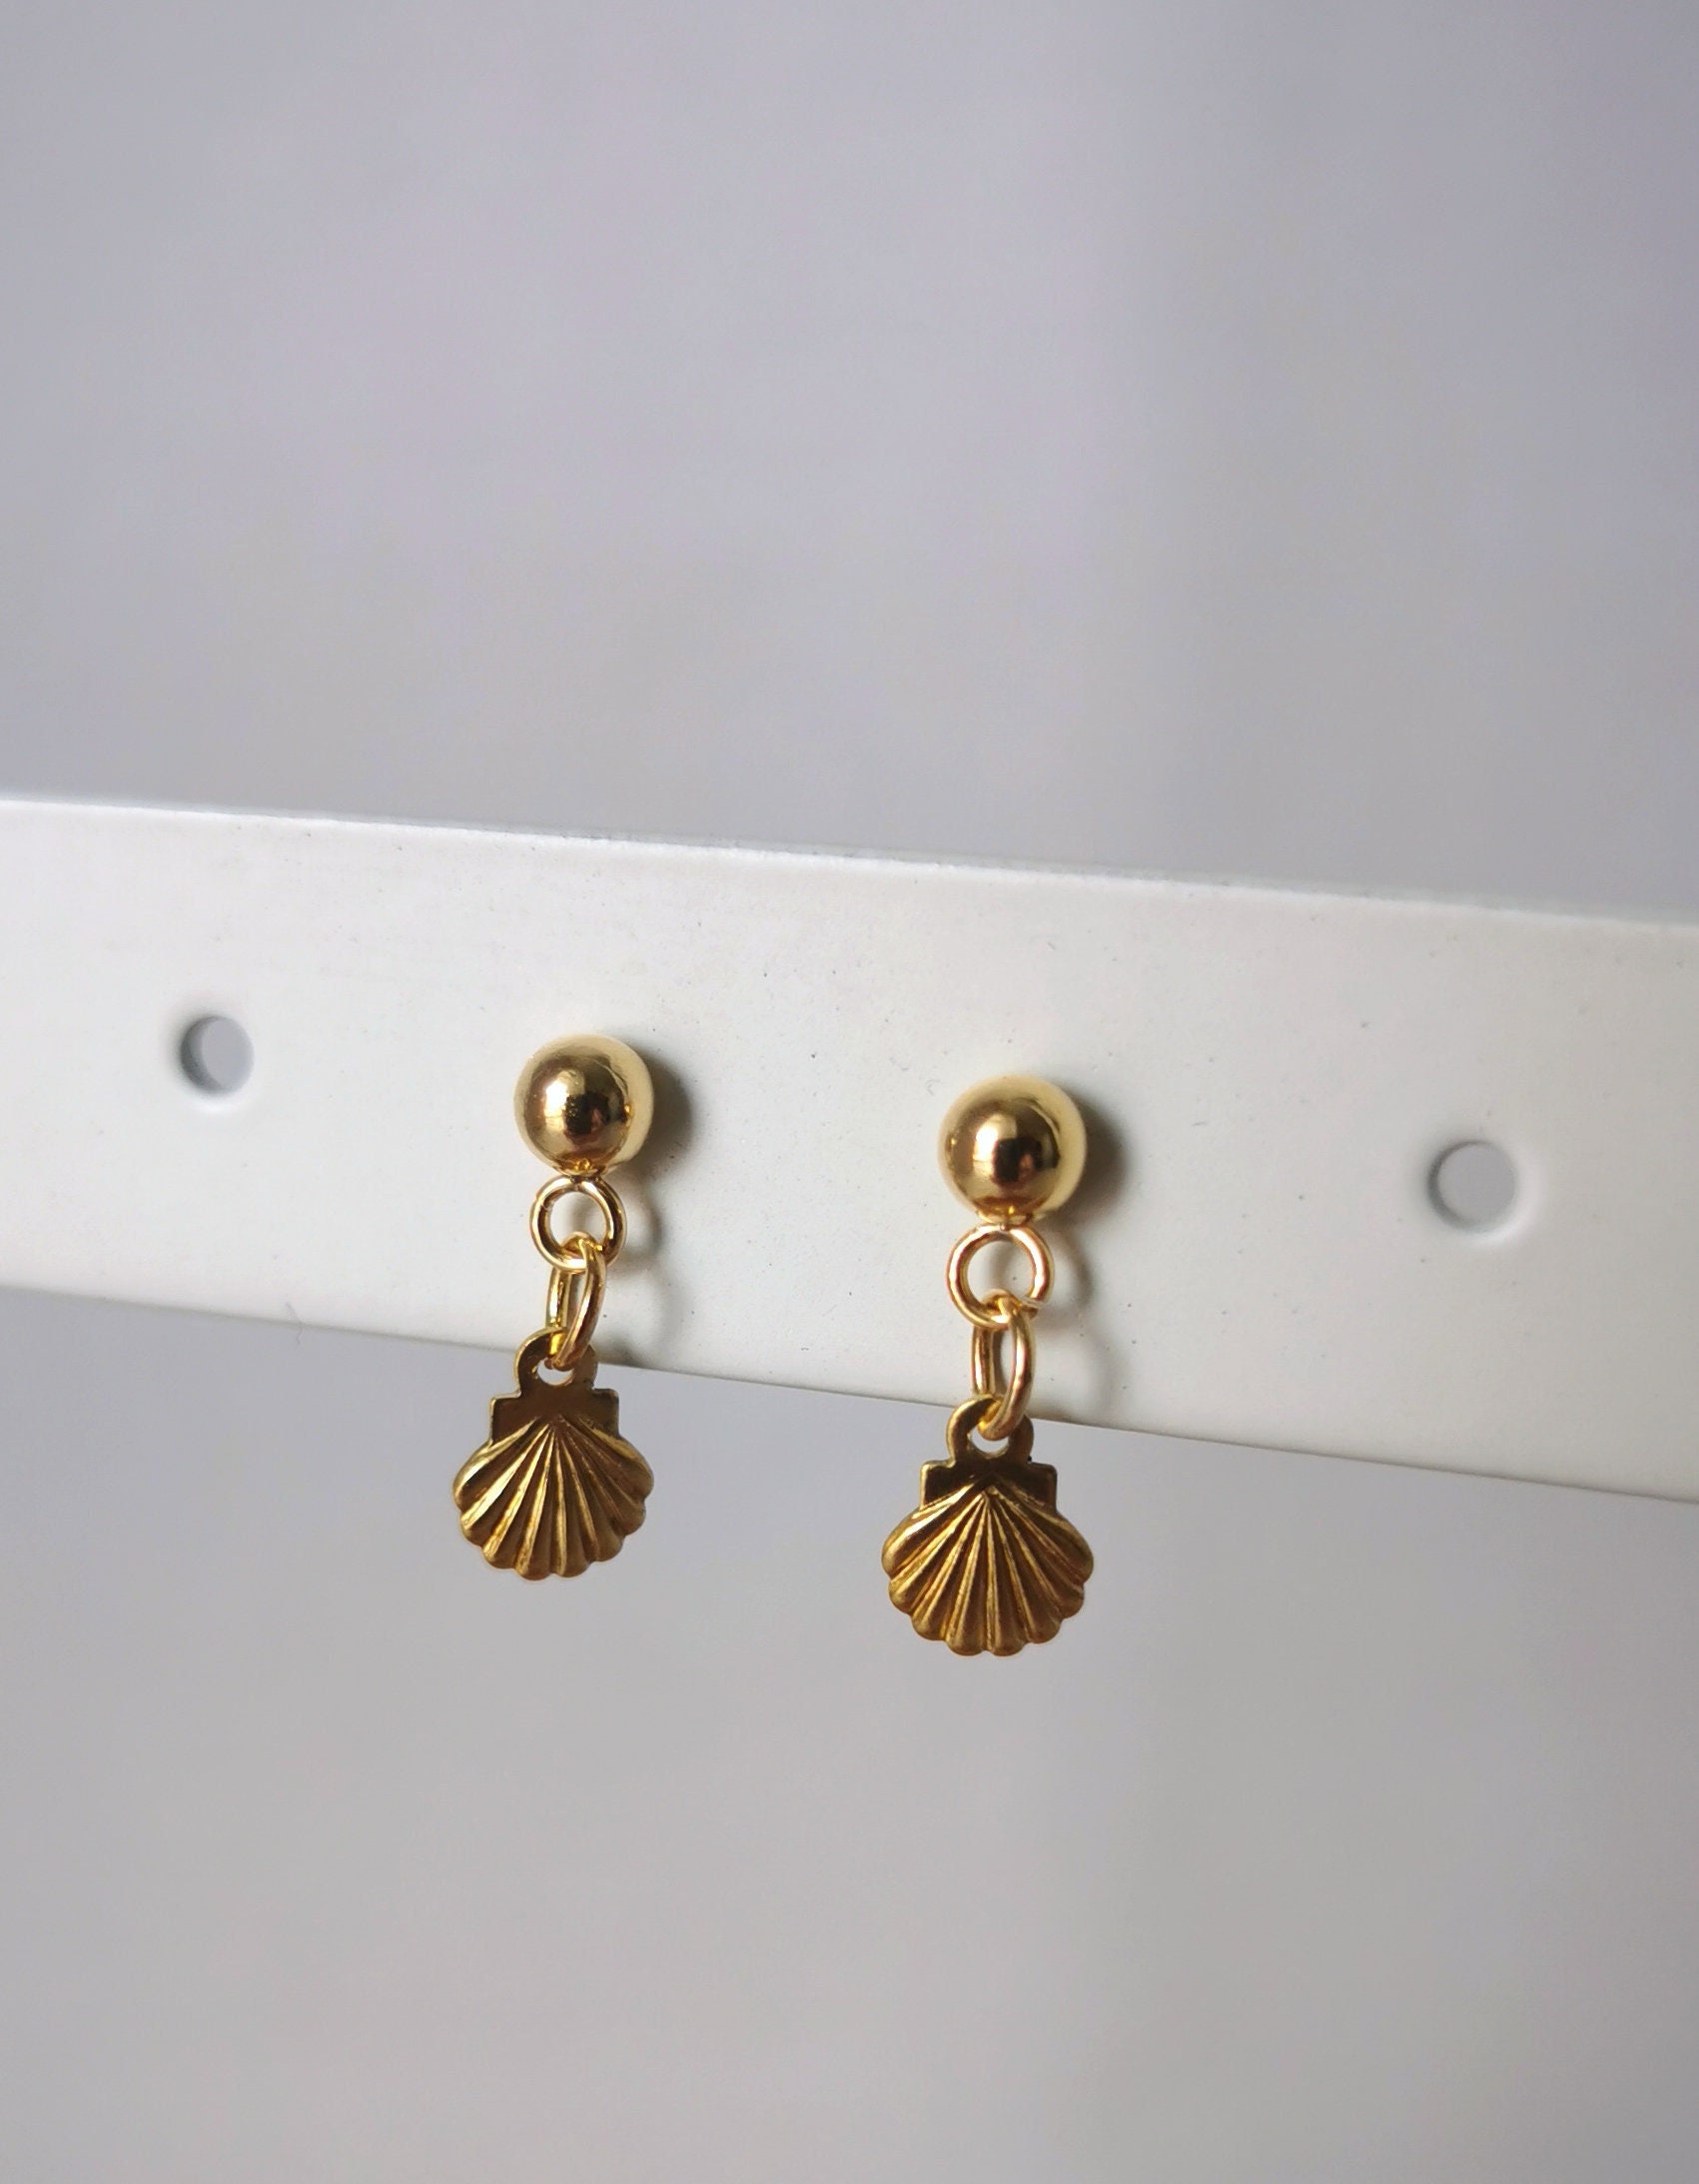 Teeny Tiny Gold Brass Delicate Shell Earrings With 18K Plated Ball Stud Post